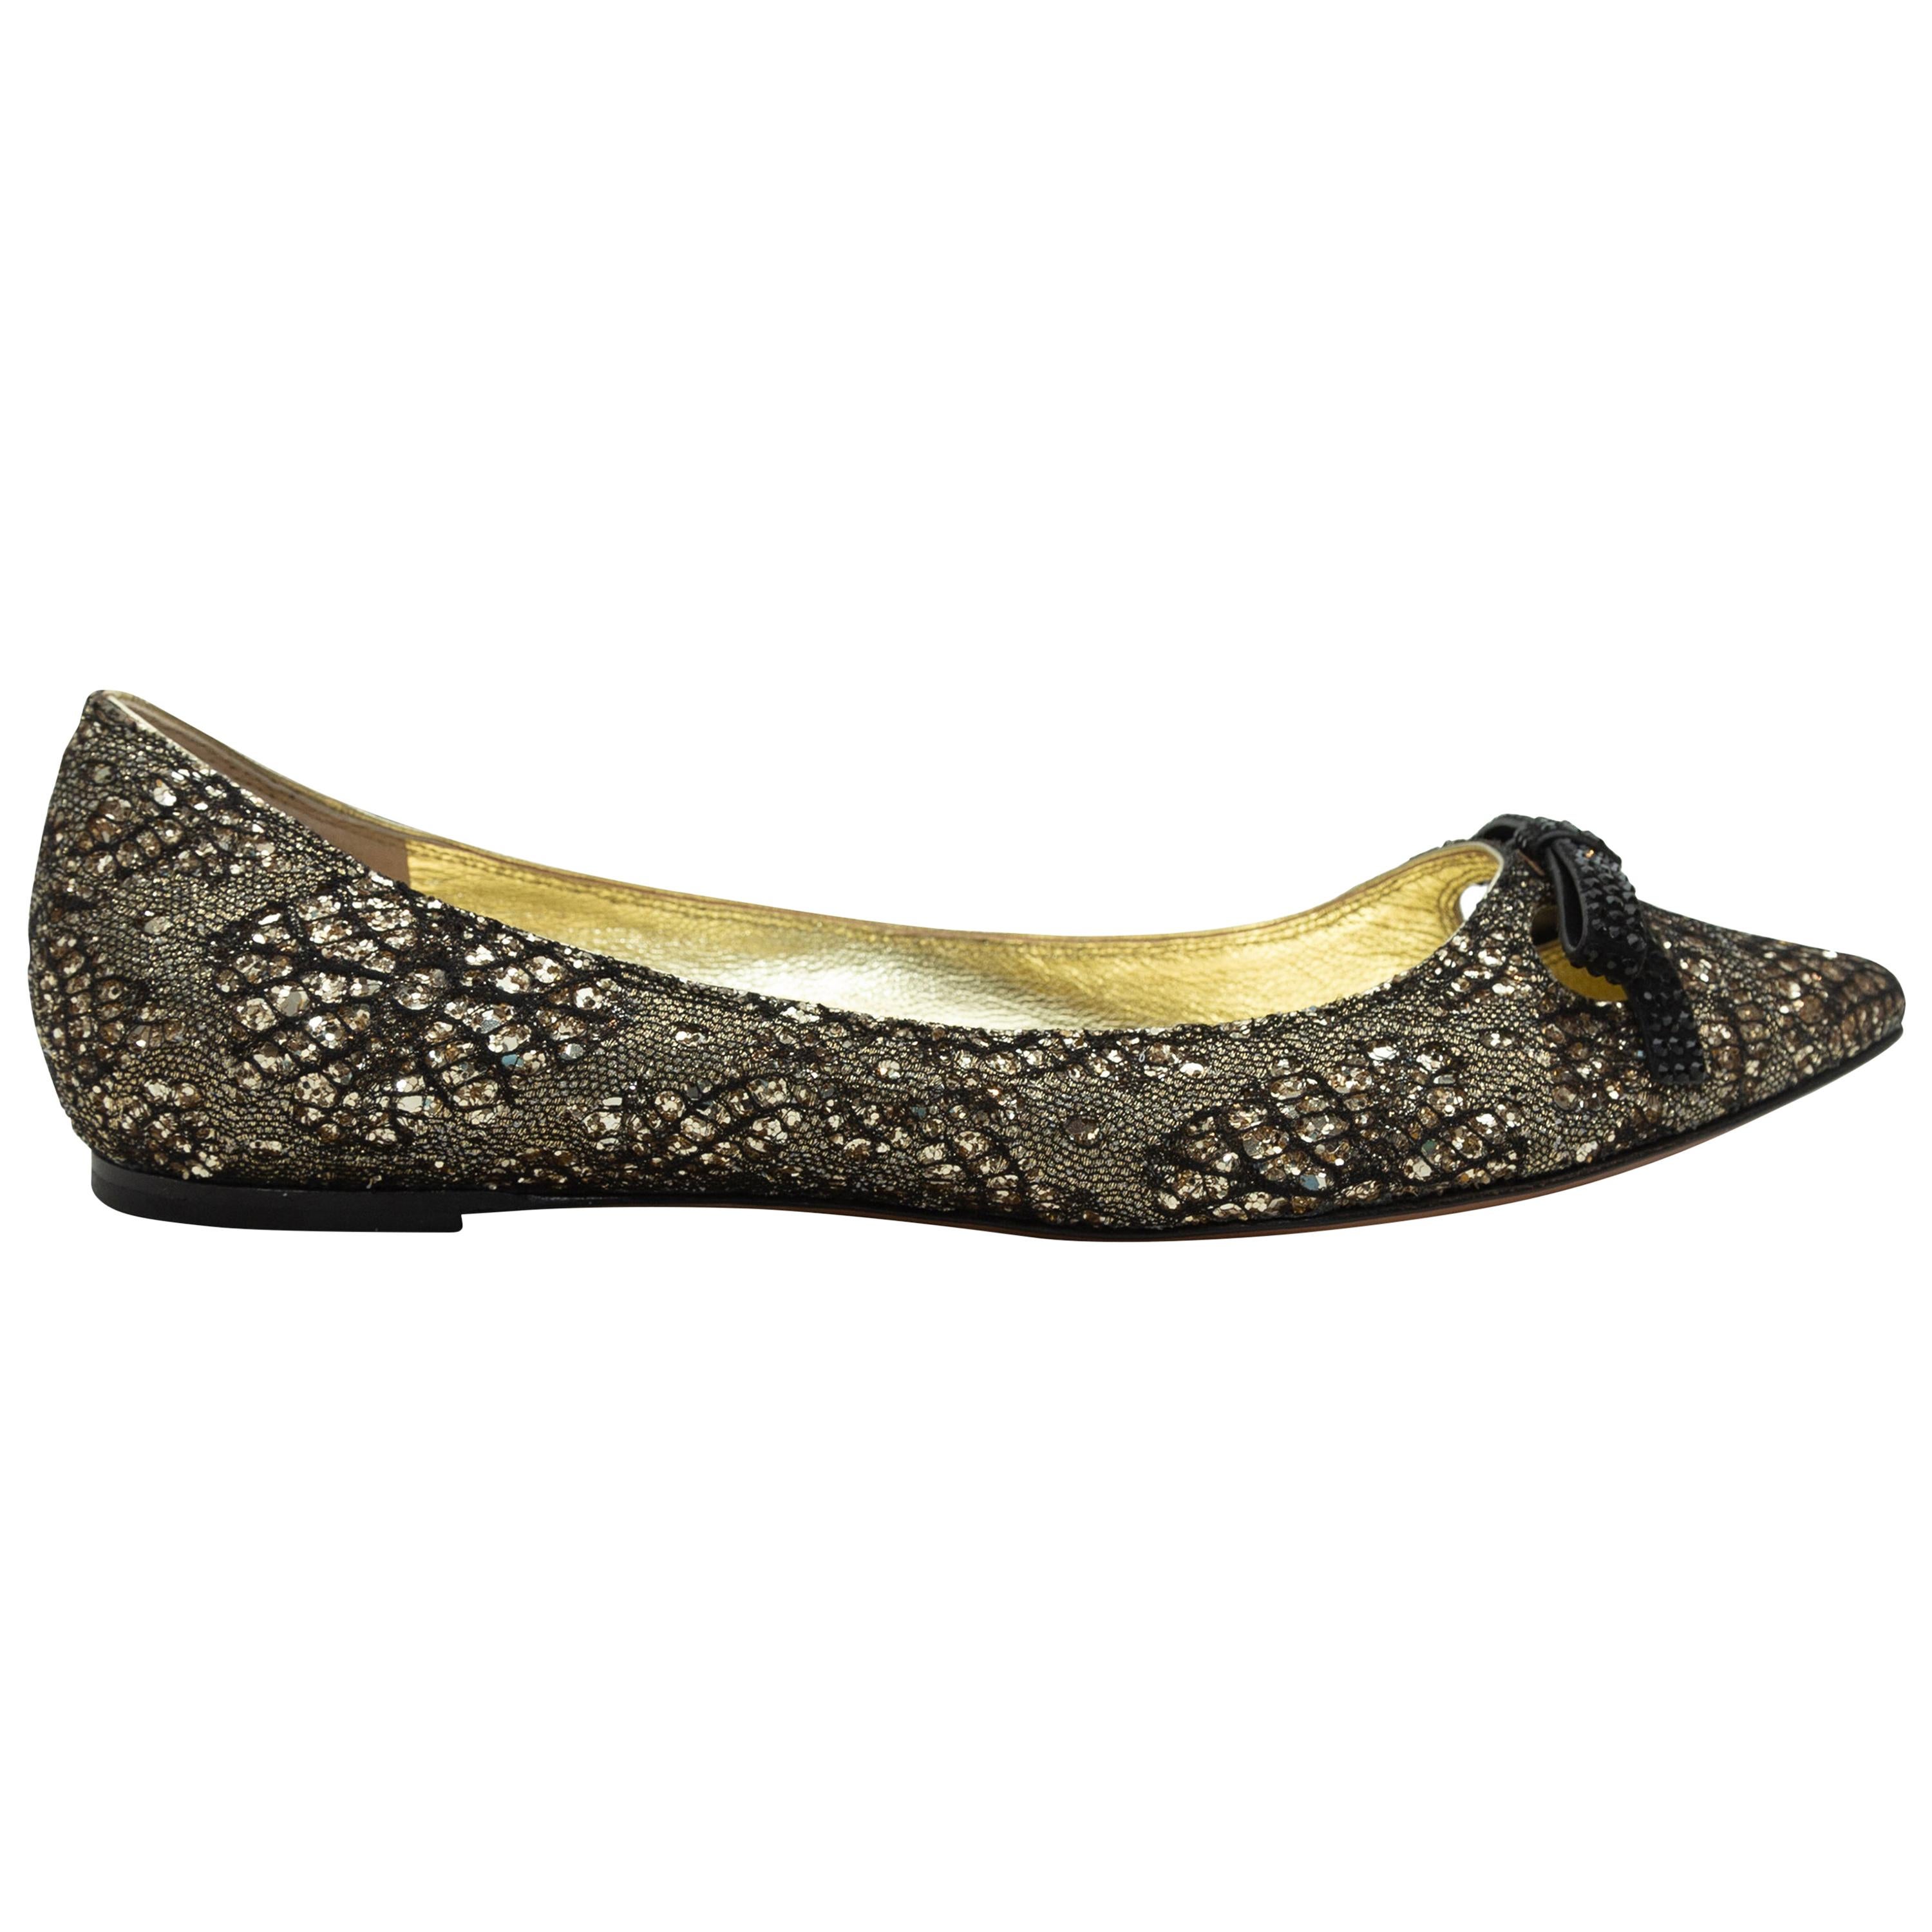 Marc Jacobs Gold & Black Lace Bow-Accented Flats